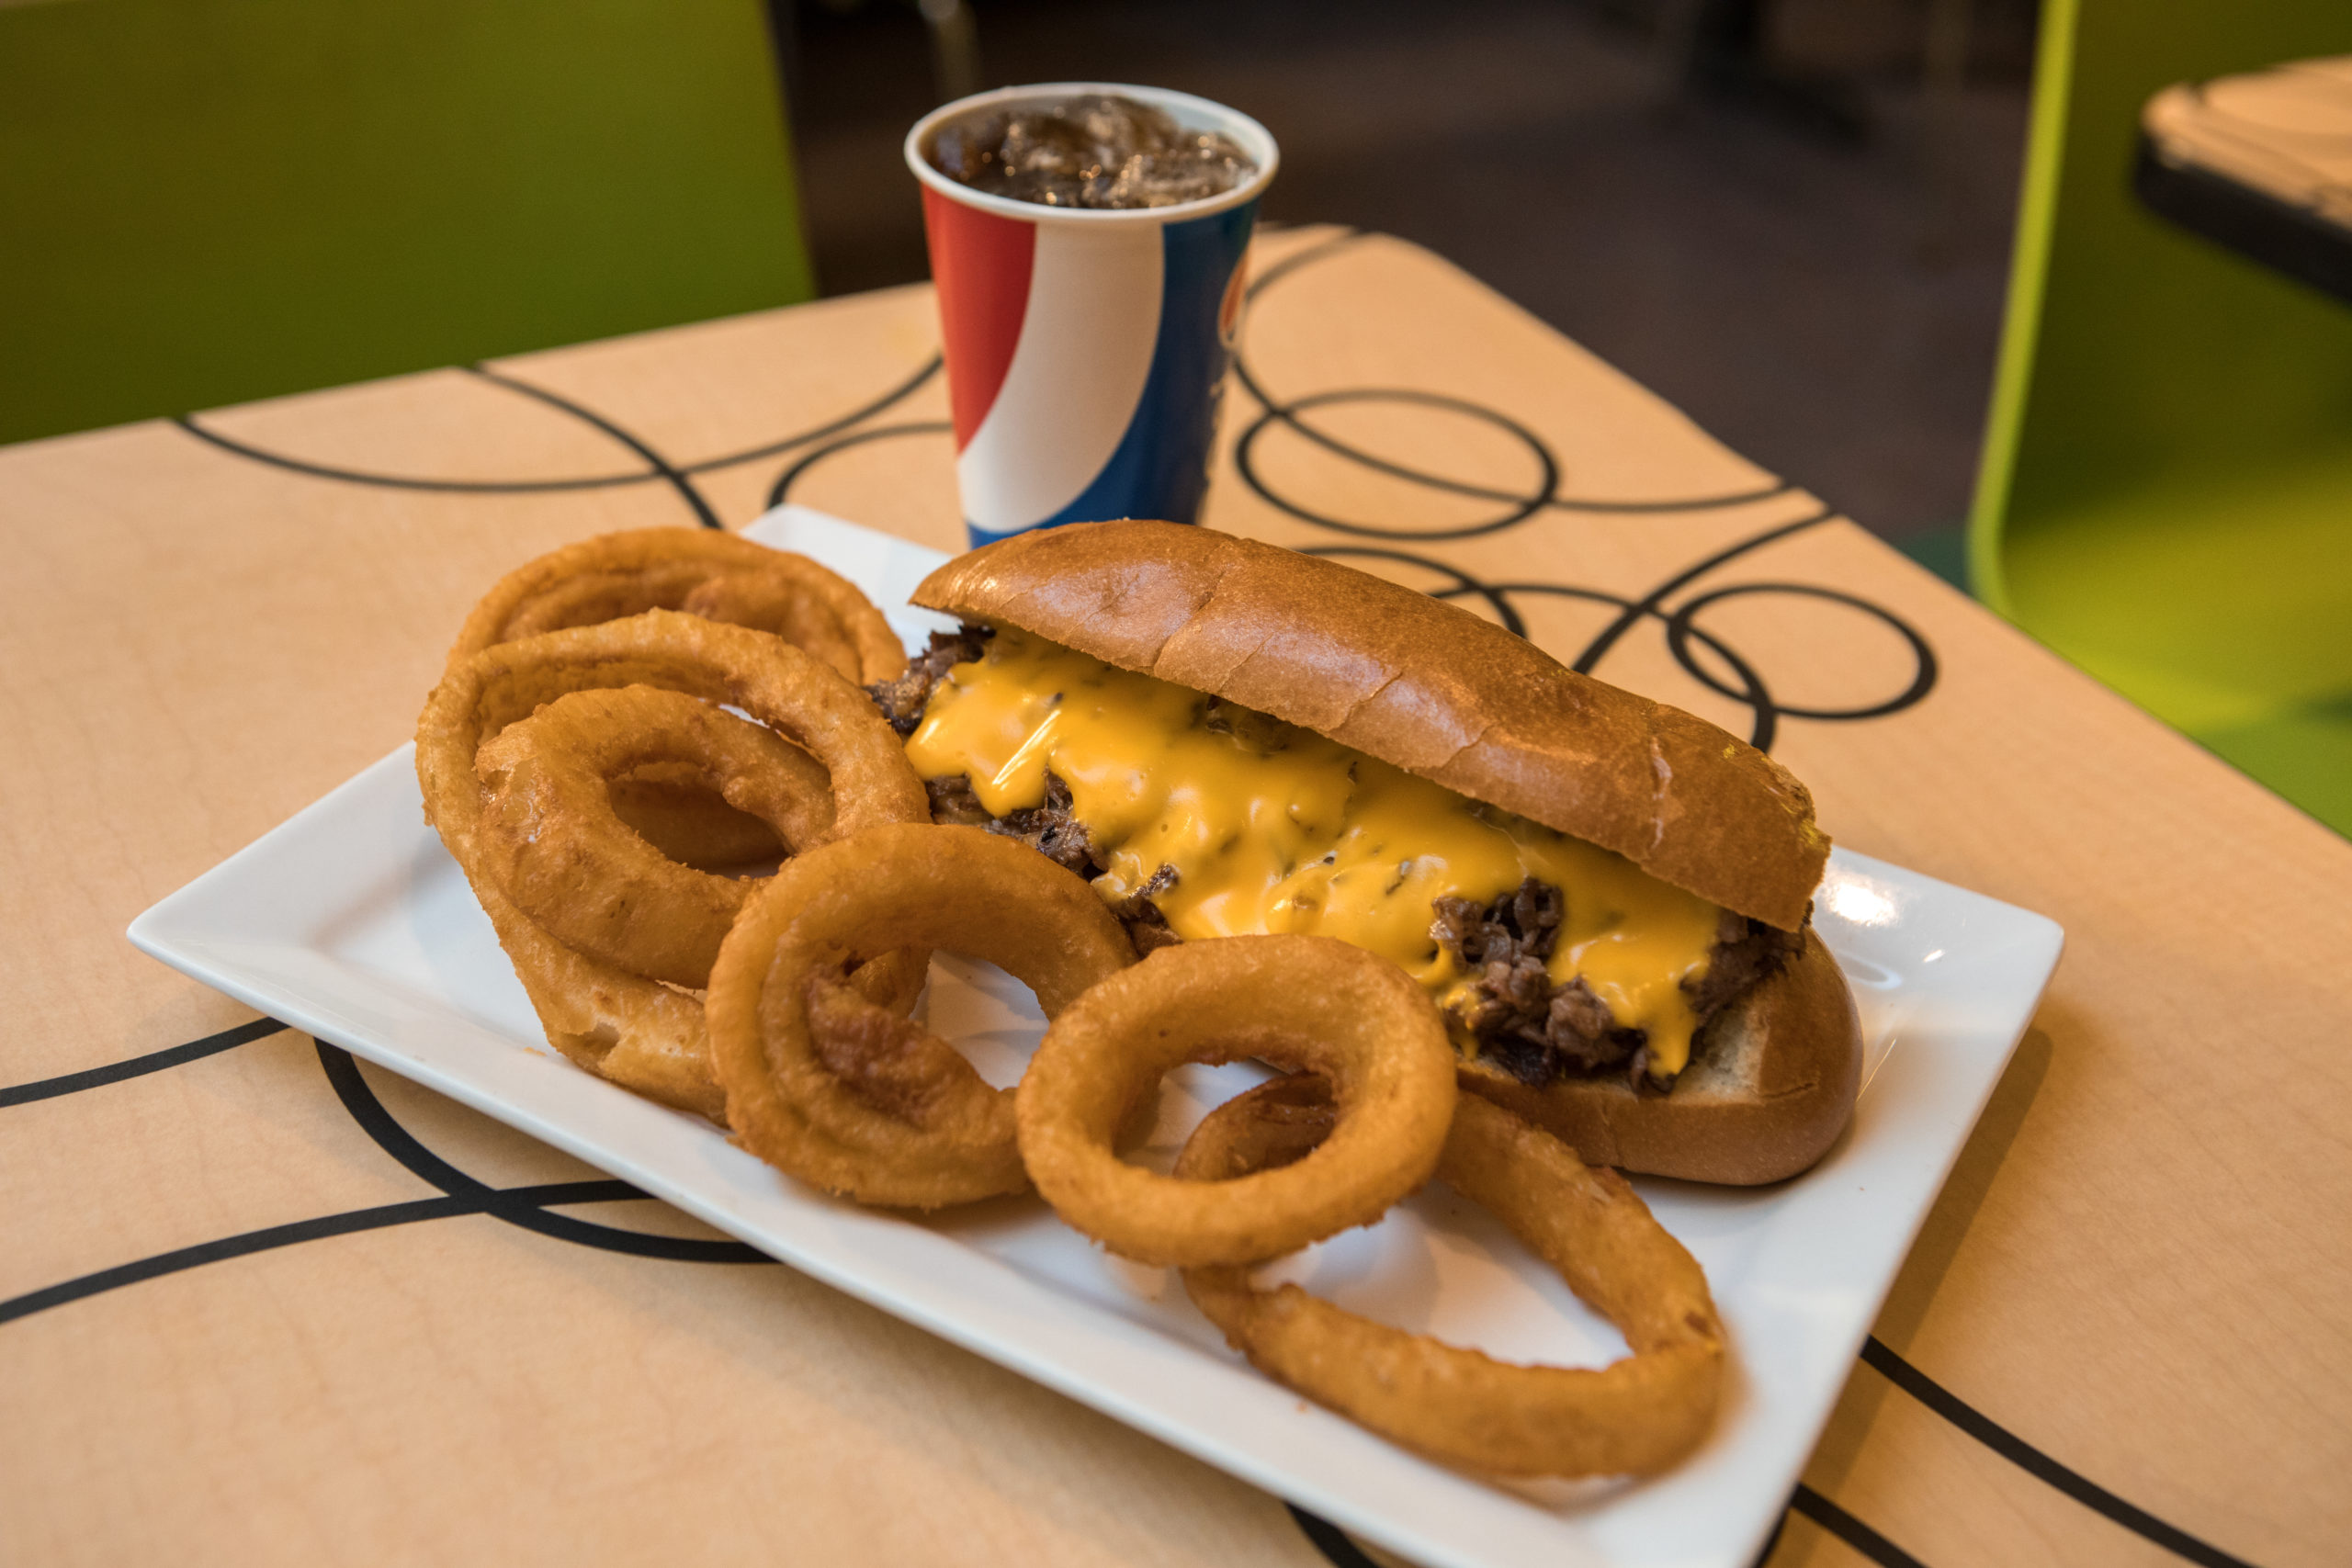 Philly cheesesteak sandwich with cola and onion rings